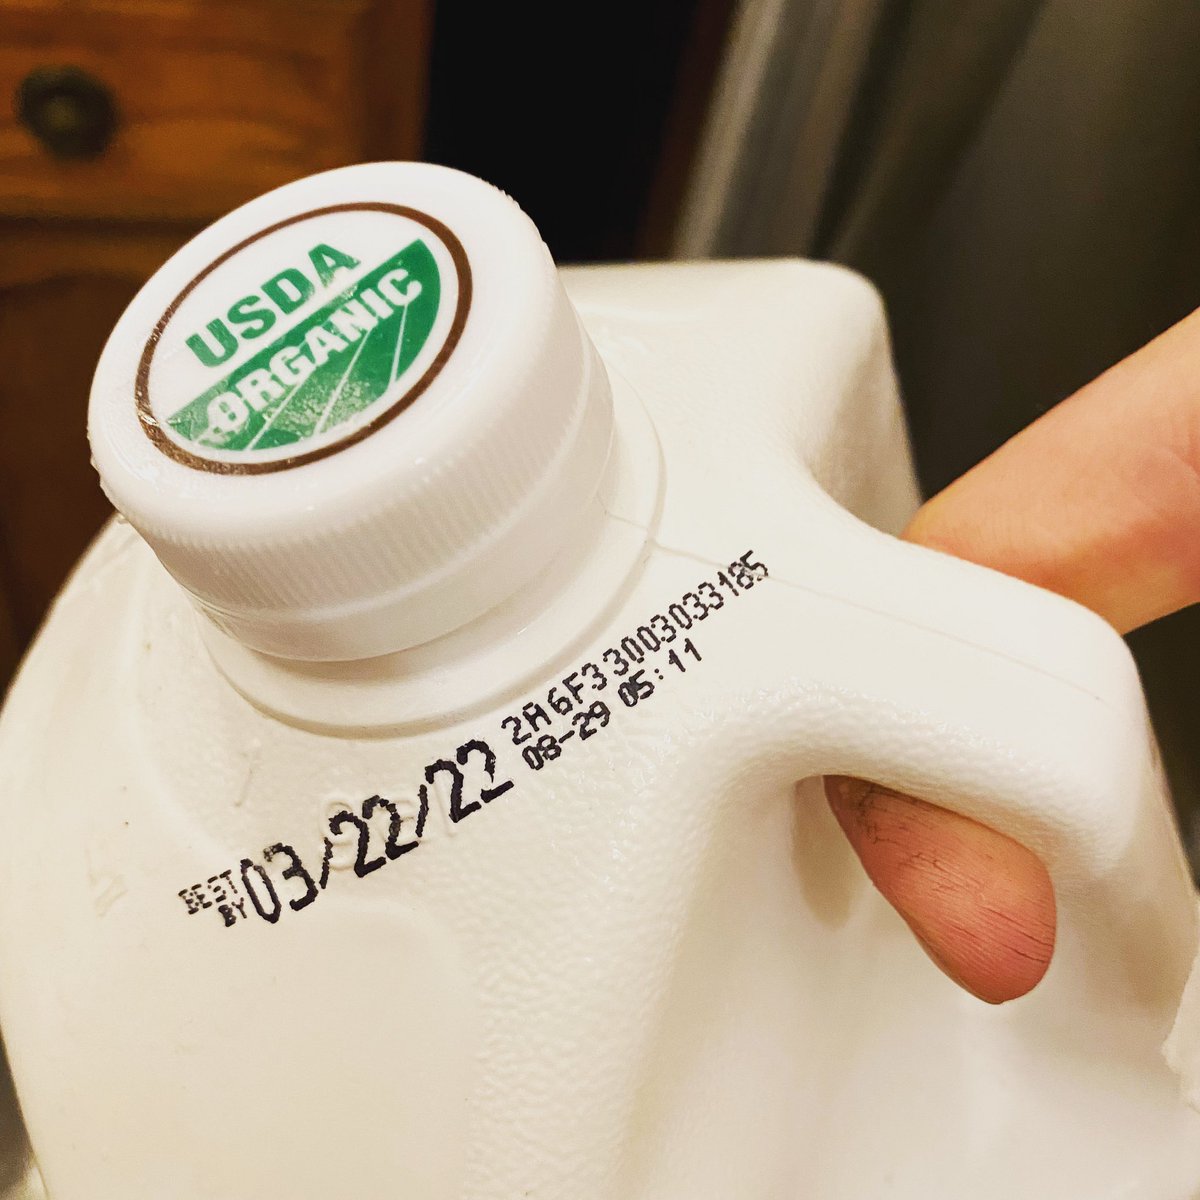 Just a small feeling this milk might be past it’s prime. 😬🤢 #weekendgroceries #grocerypickup #checkexperationdates